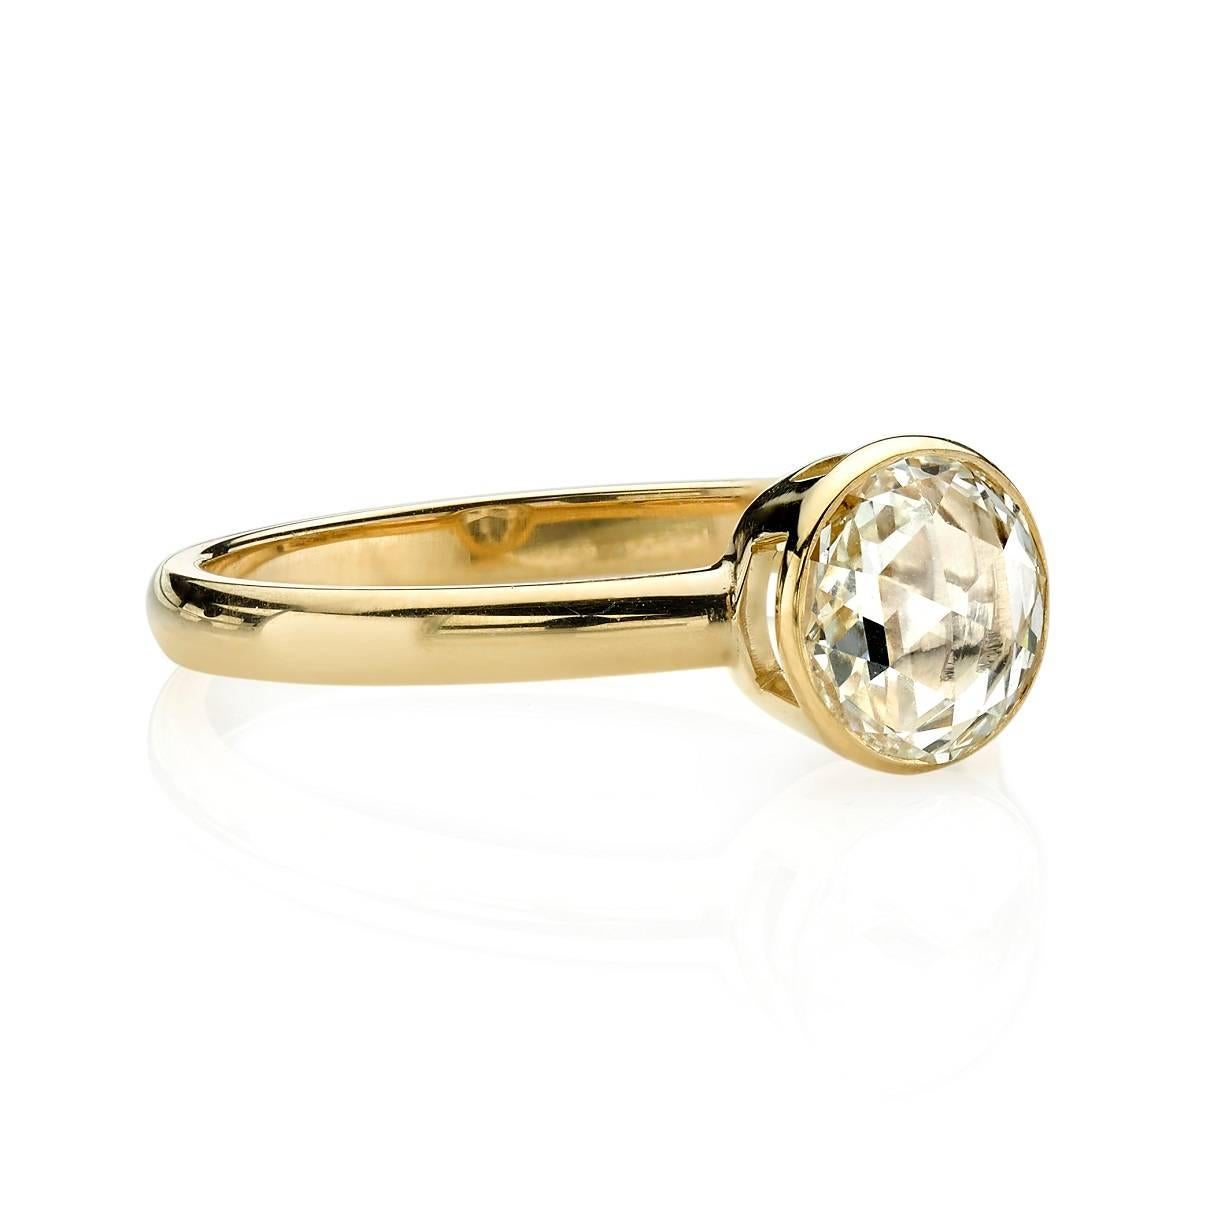 0.68ct F/VS2 EGL certified Rose cut diamond set in a handcrafted 18k yellow gold setting. A unique take on a solitaire design.